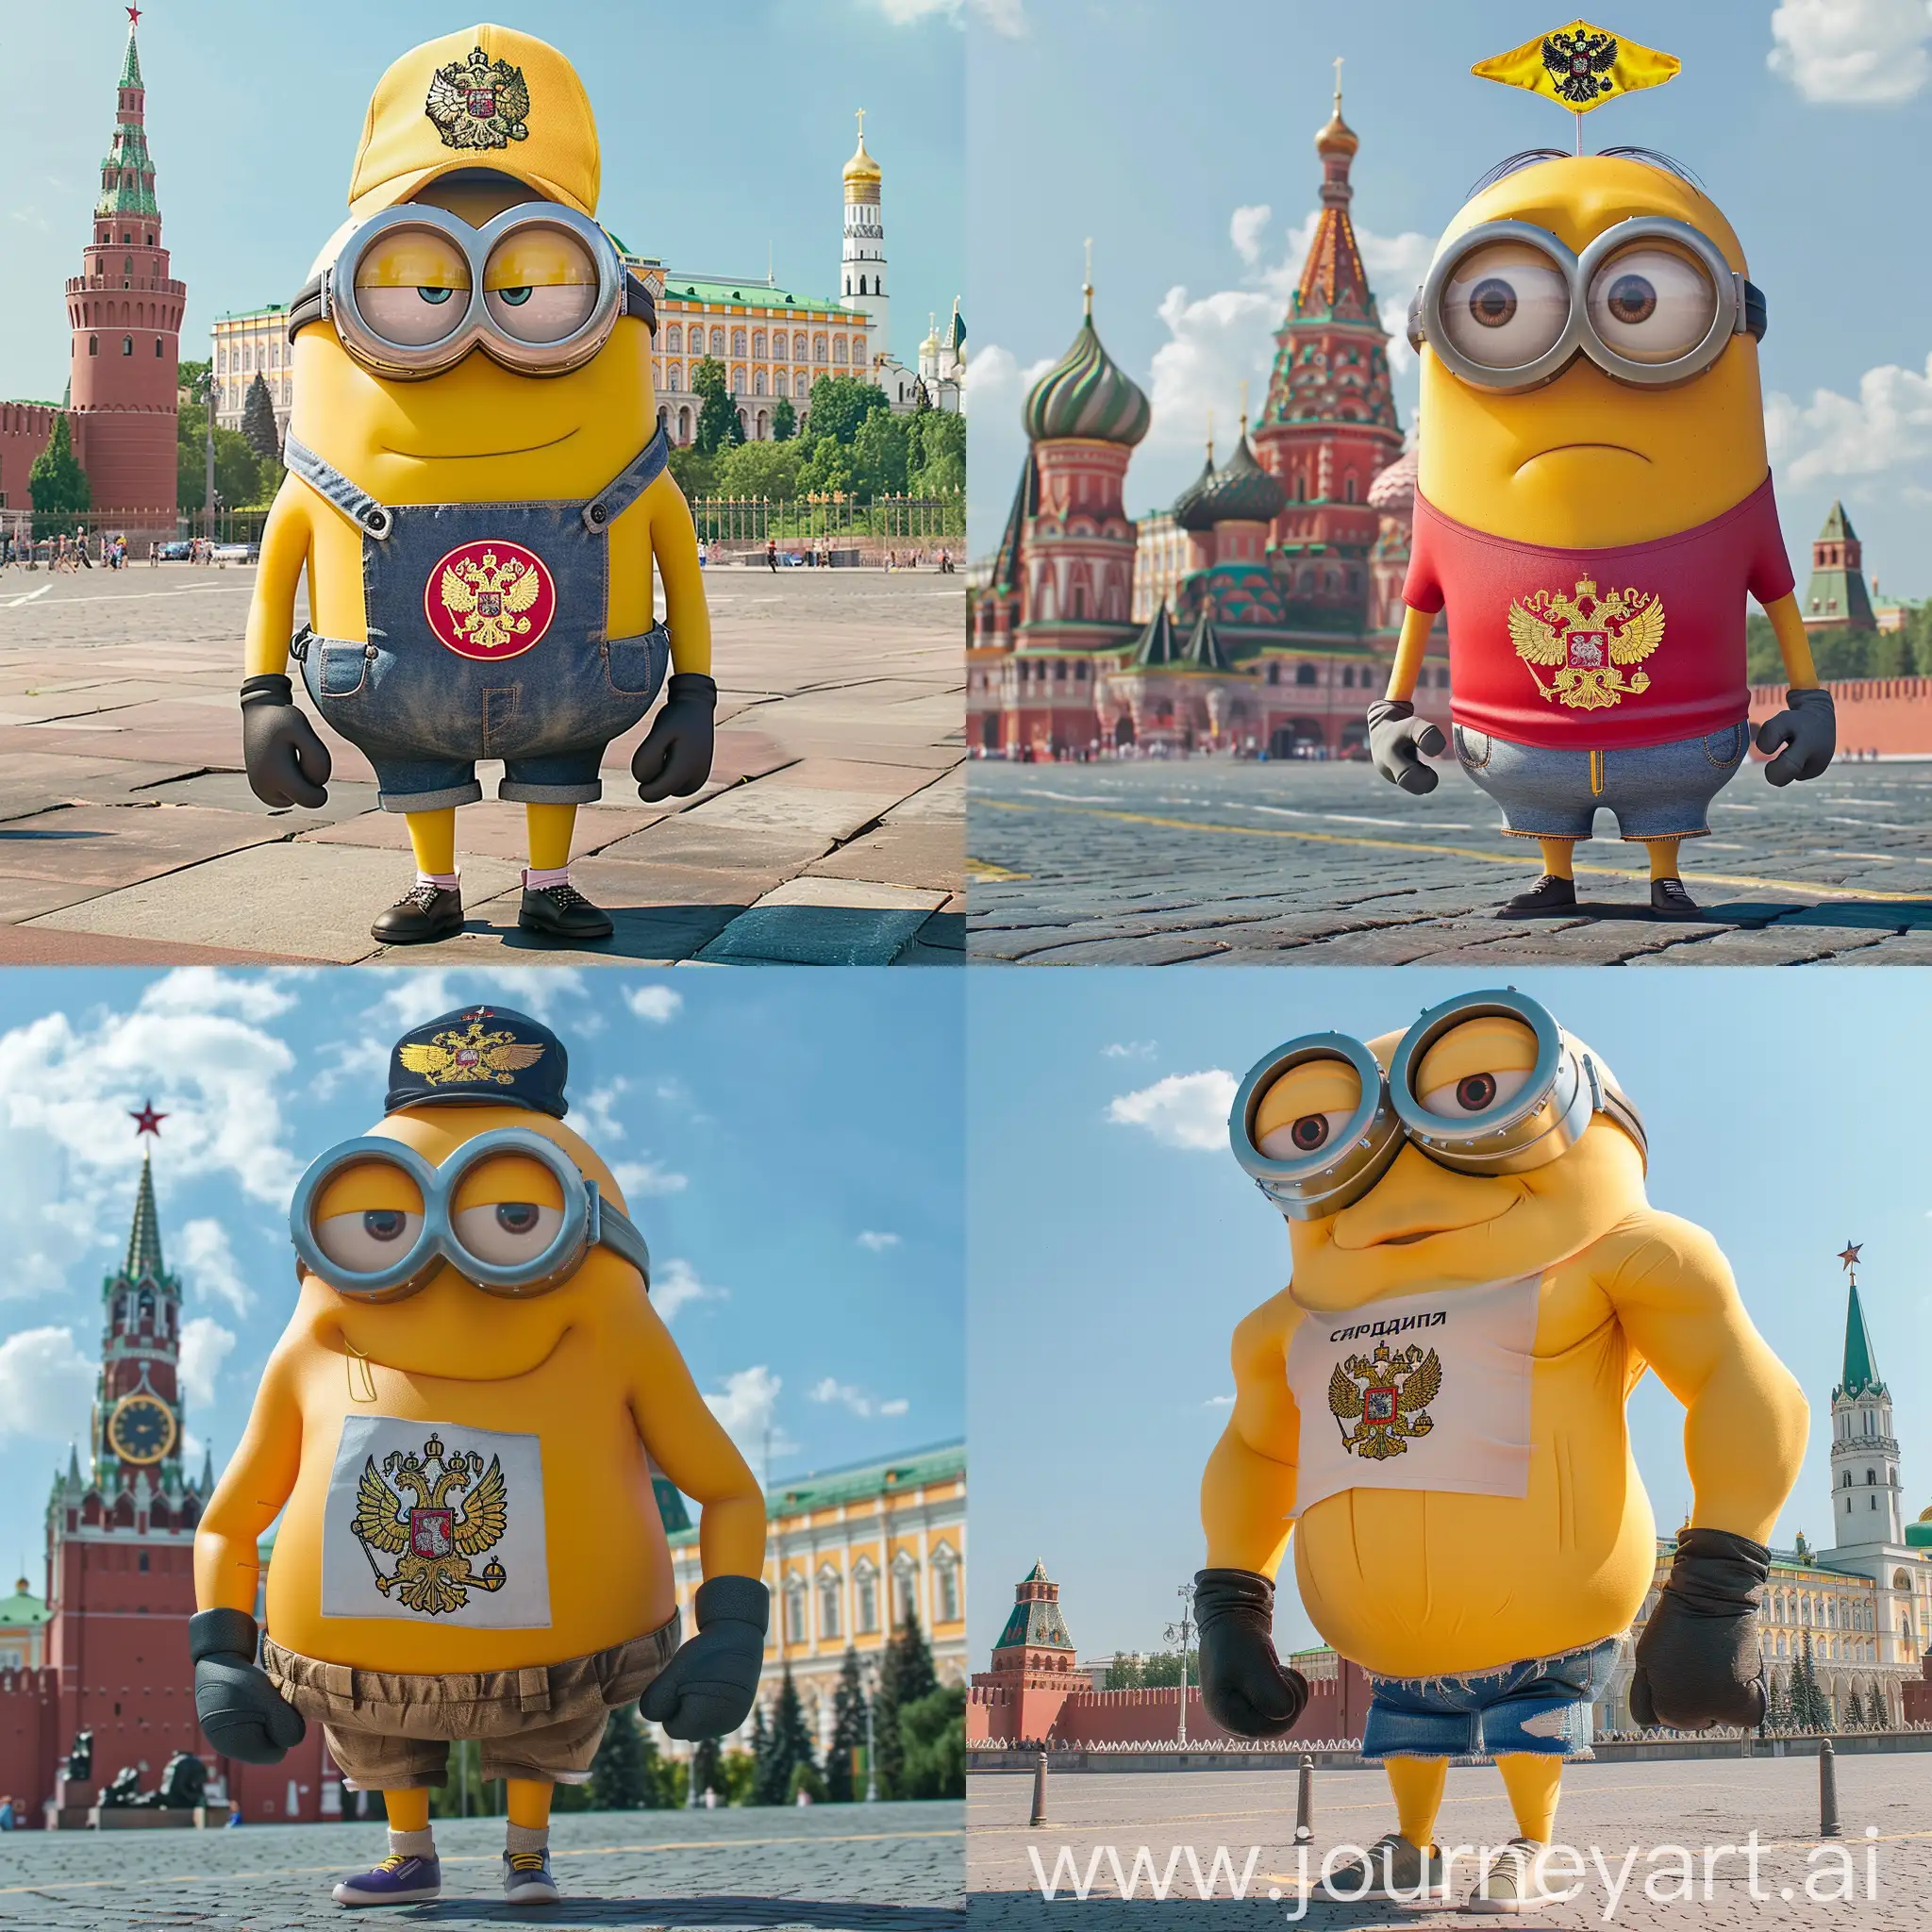 Giant-Minion-Stands-Proudly-by-Kremlin-in-Moscow